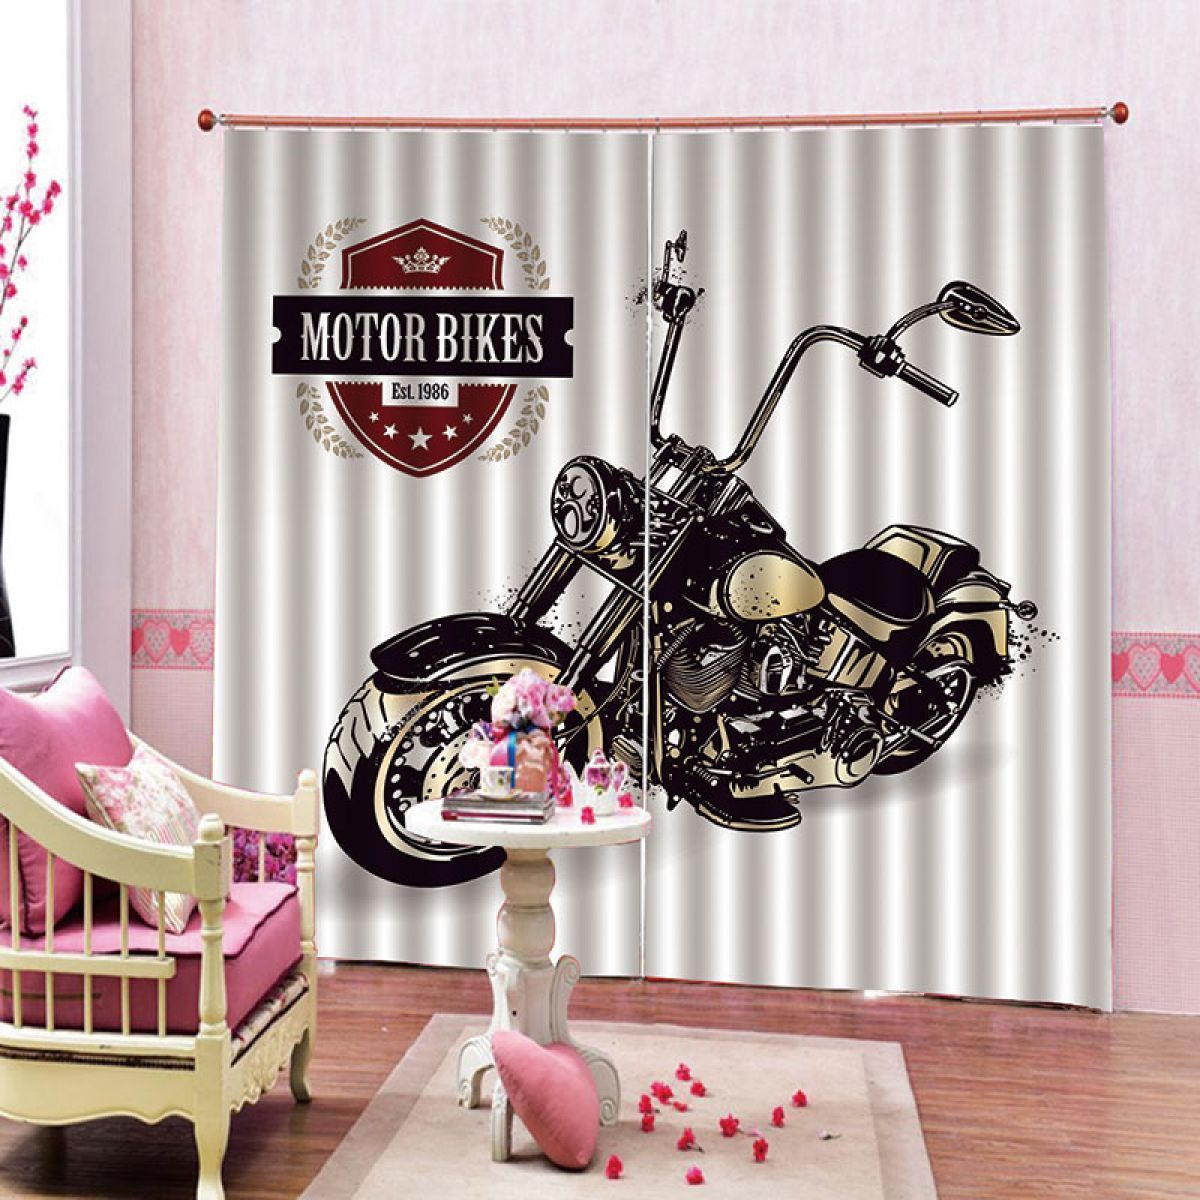 Motorcycle Cool Design Printed Window Curtain Home Decor